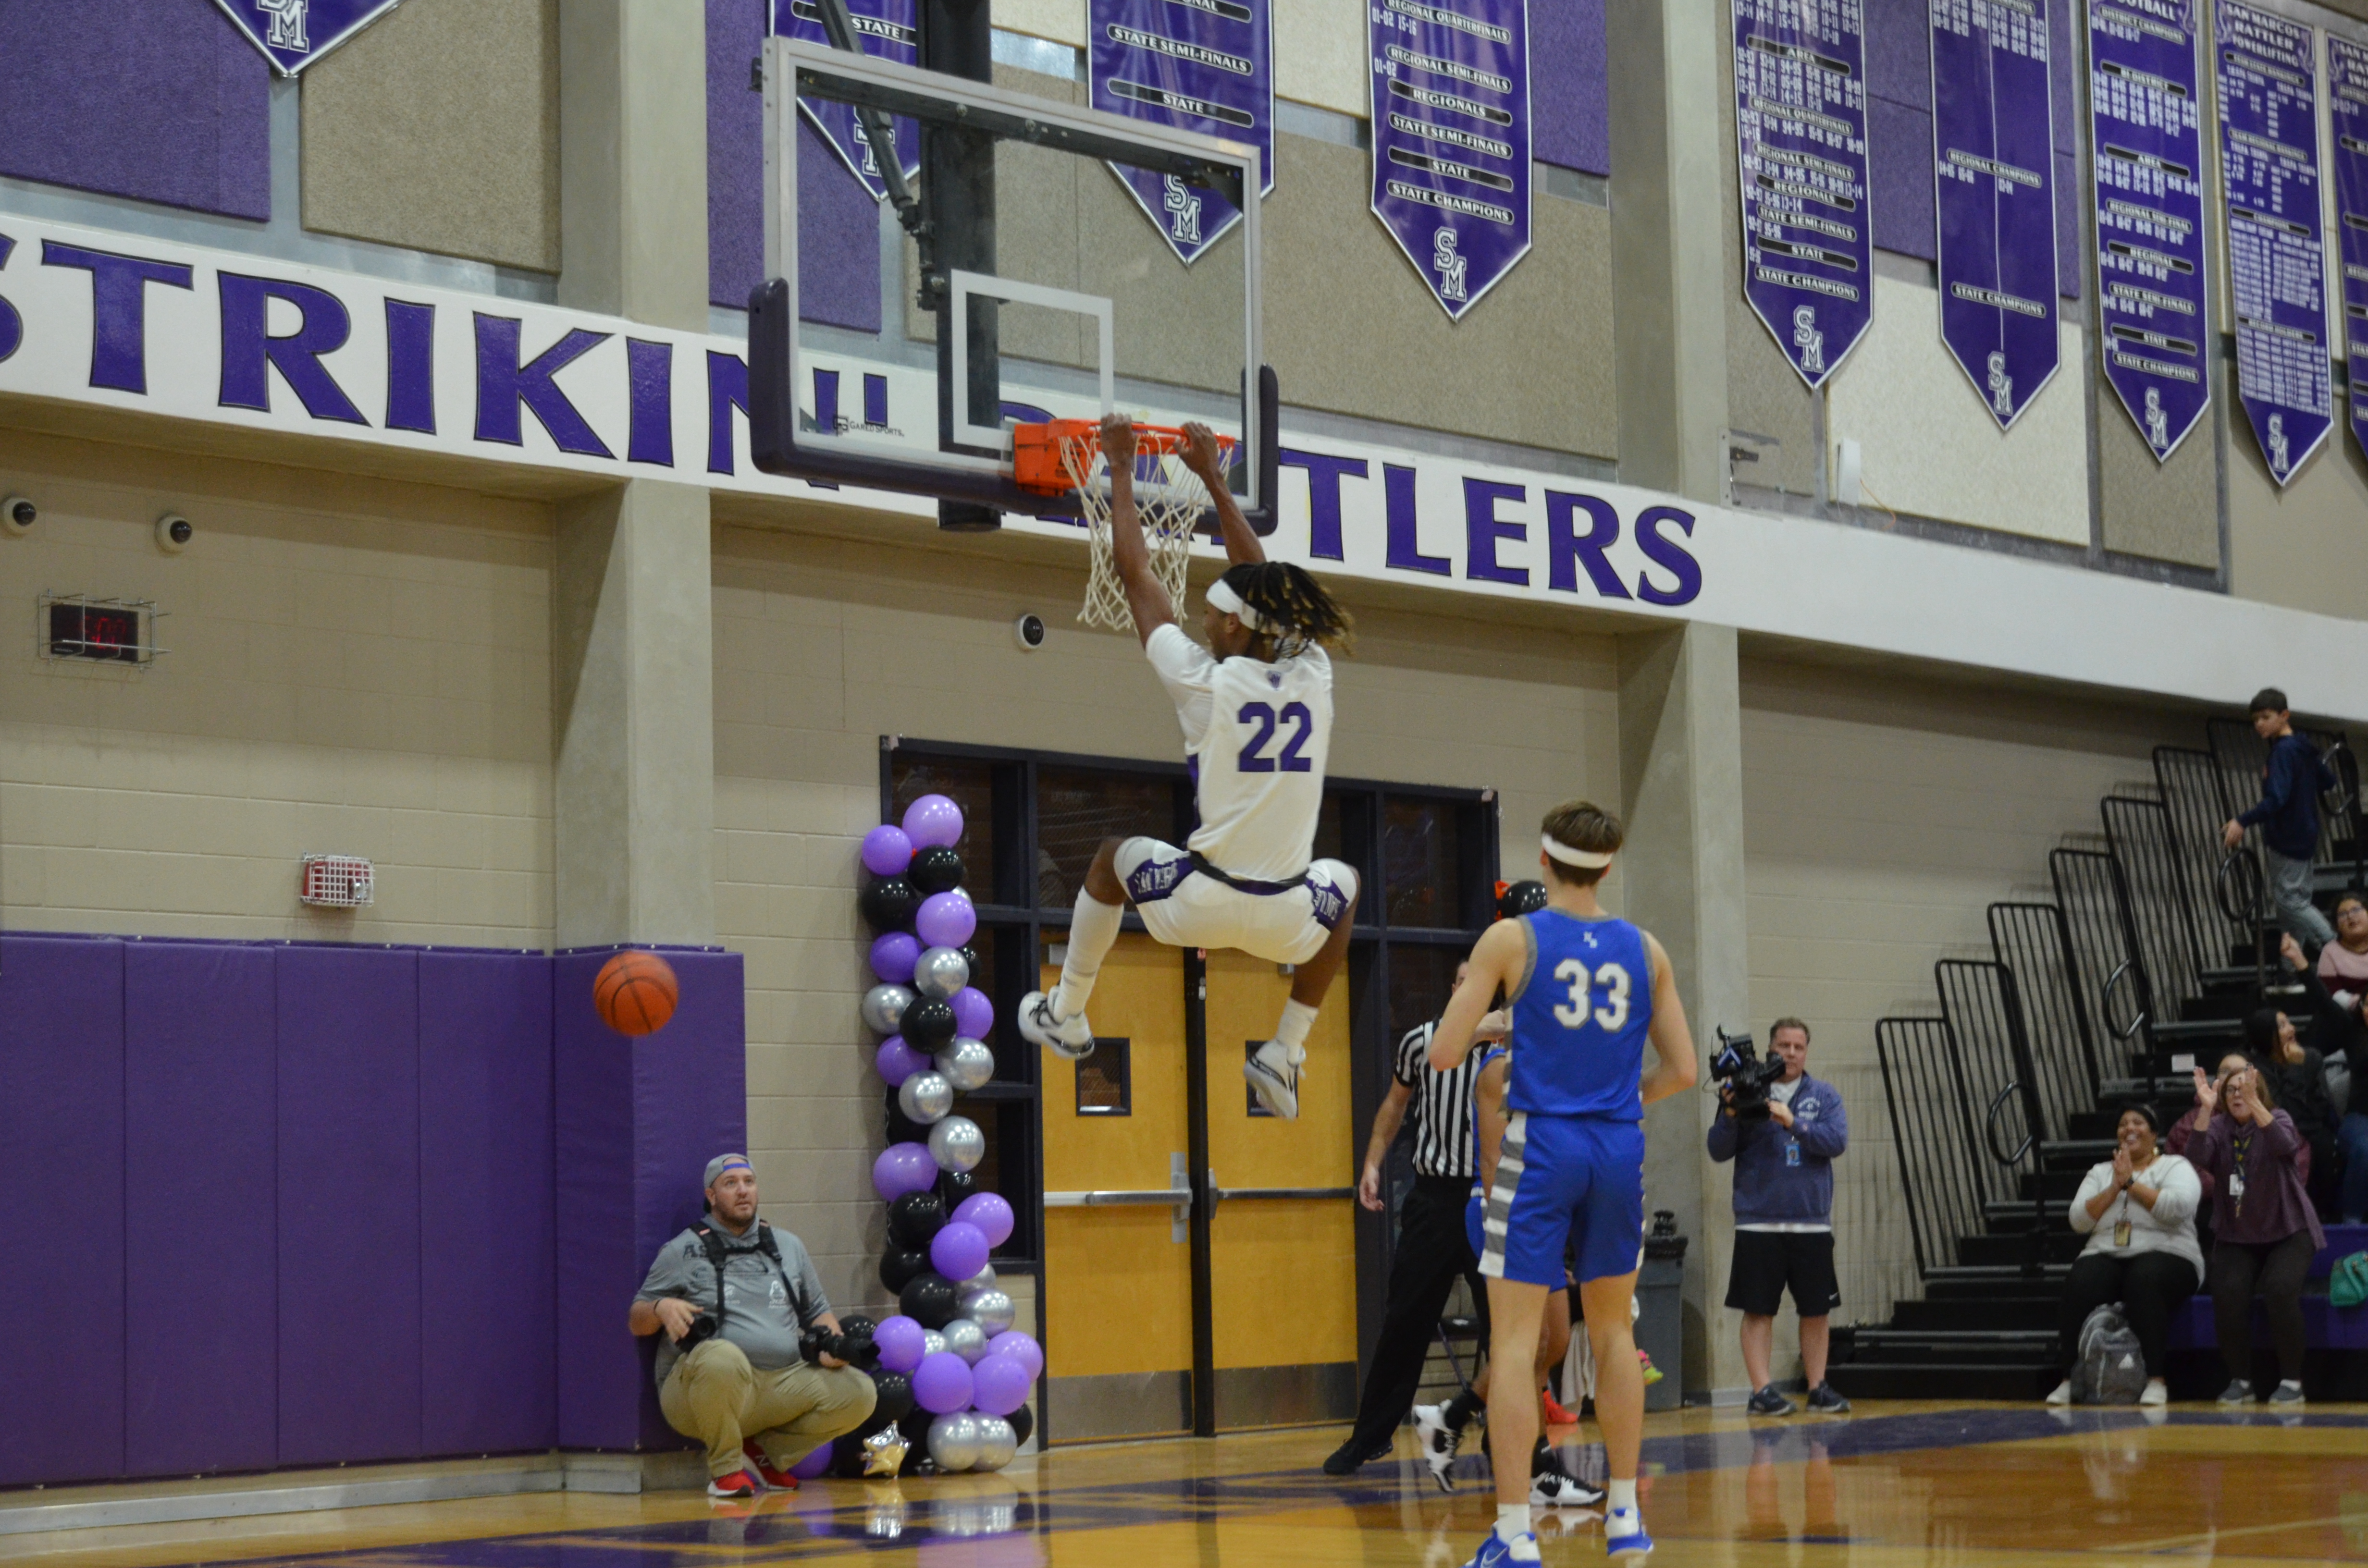 One blue basketball player stands idly on defense while white and purple player hangs from the rim off a big dunk .